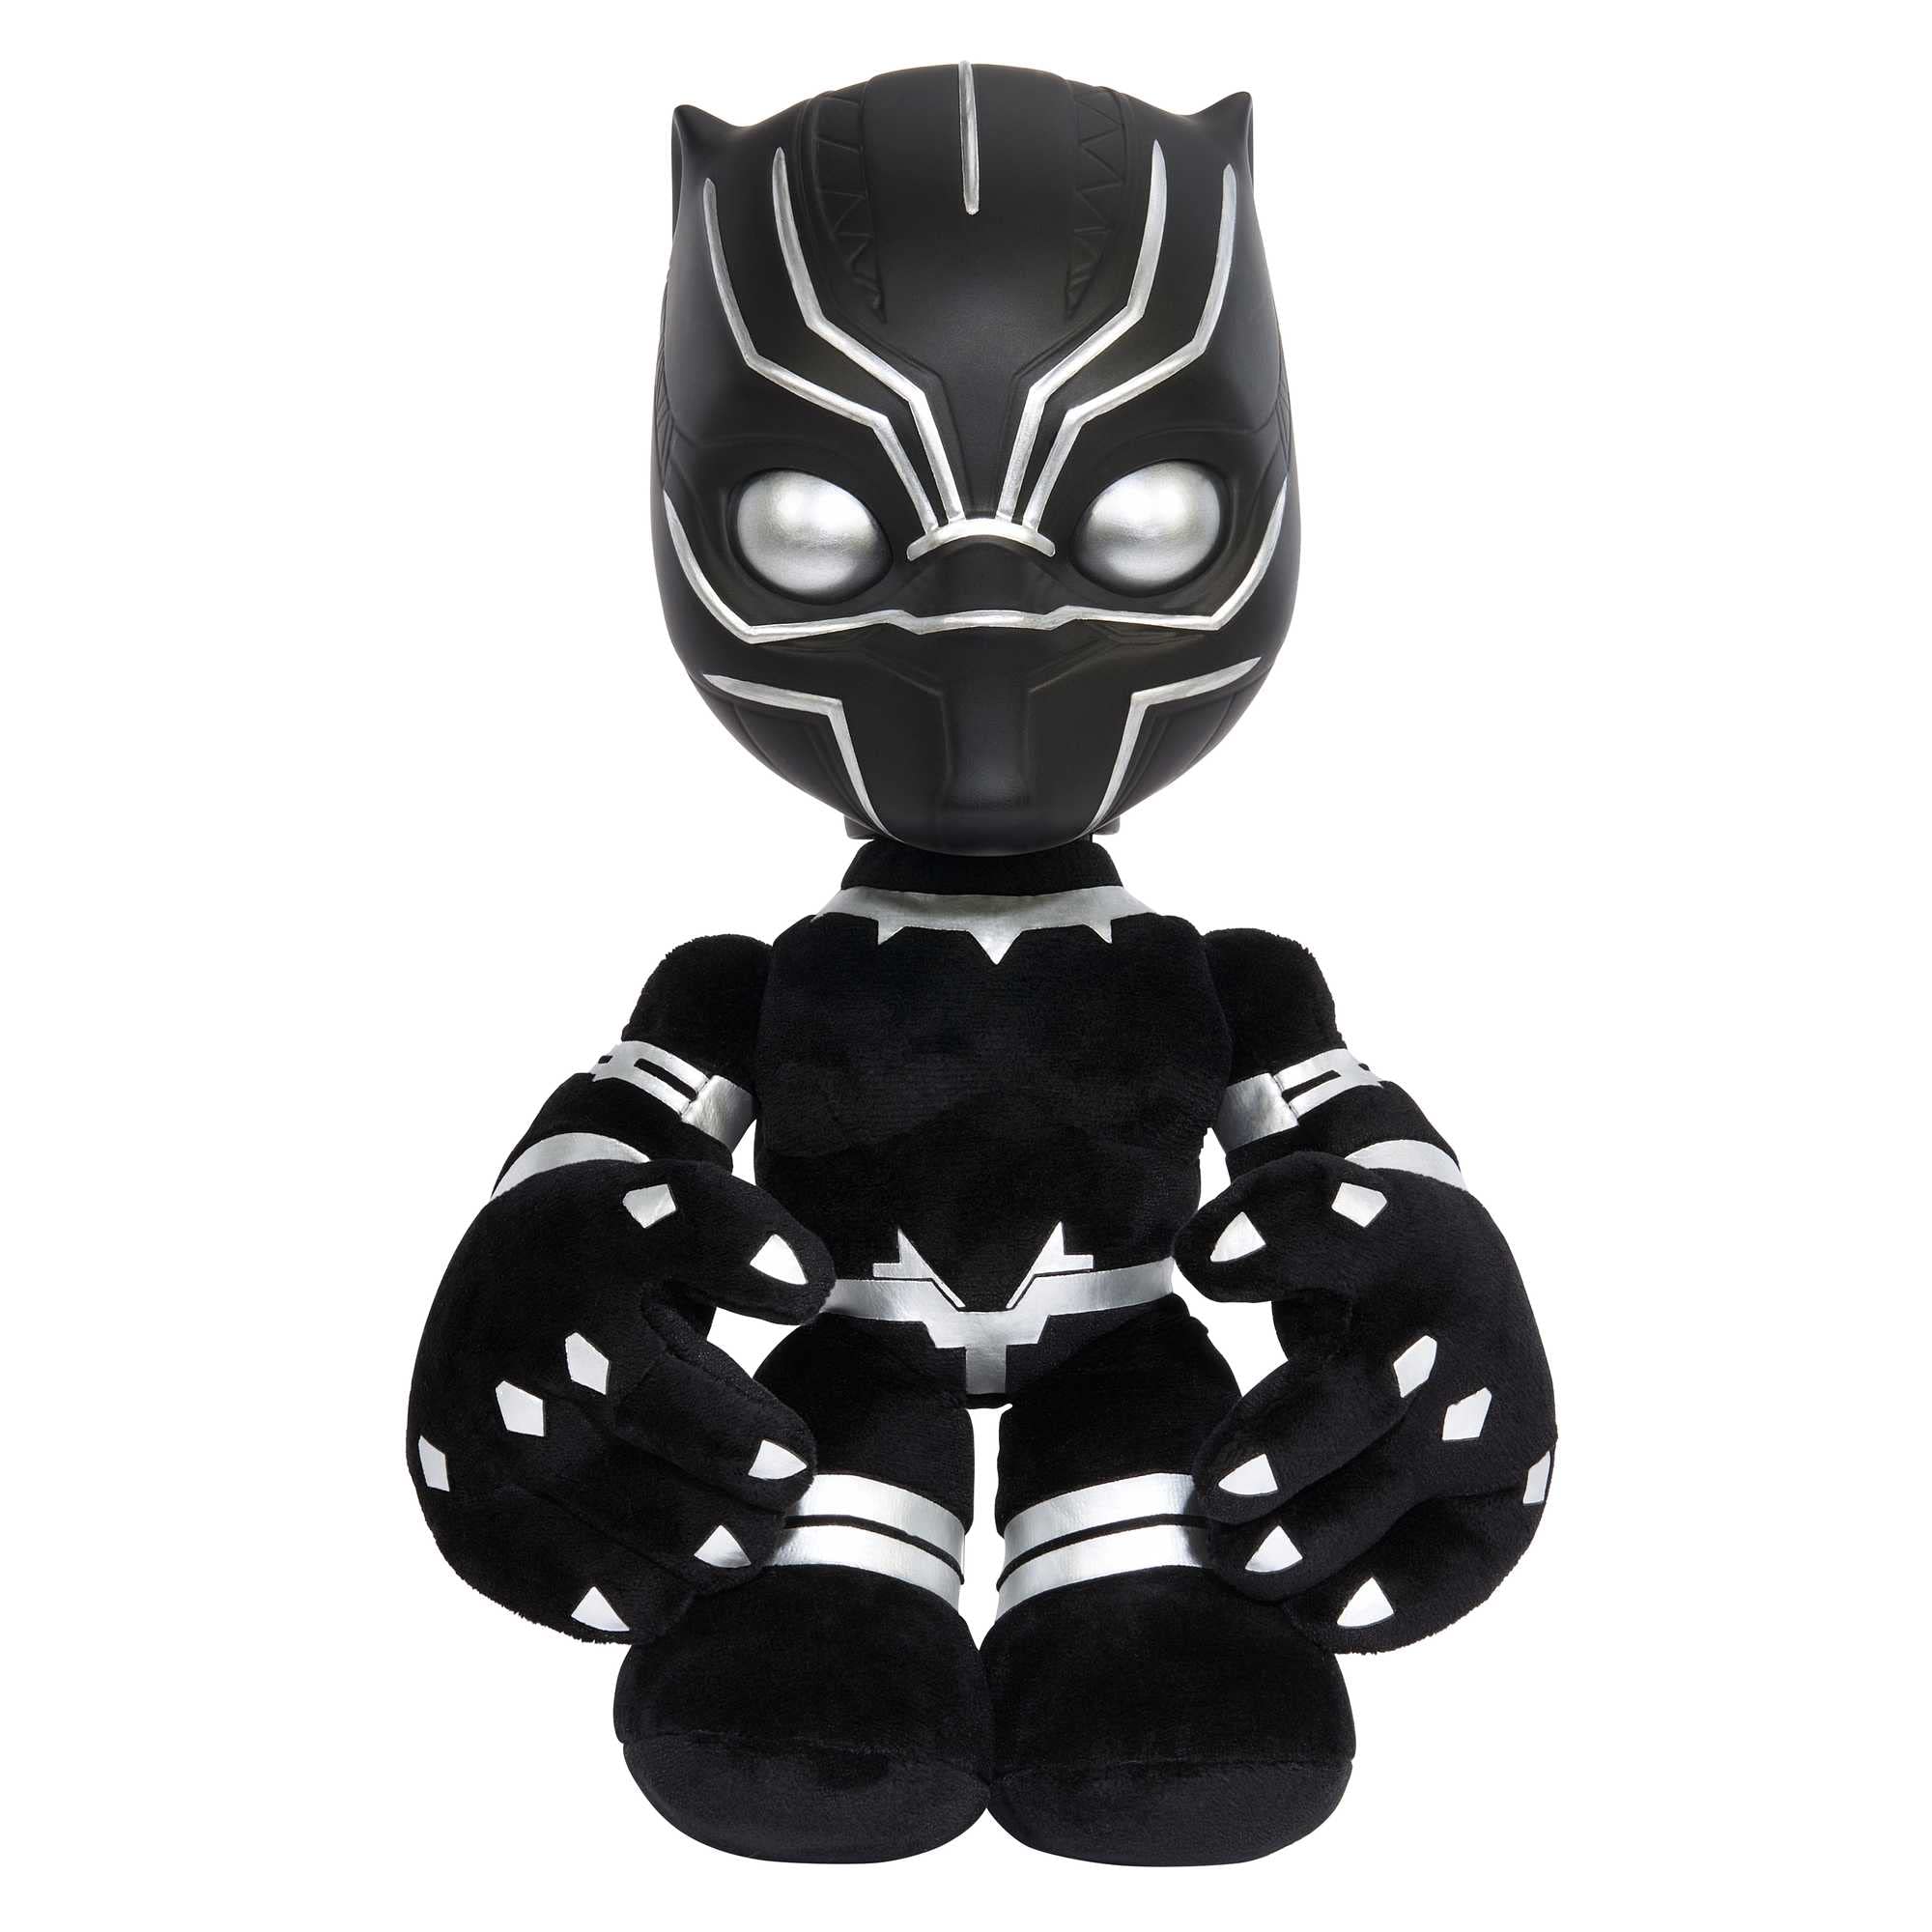 11" Mattel Marvel Black Panther Heart of Wakanda Plush Figure w/ Lights & Sounds $6.49 + Free Shipping w/ Prime or on $35+